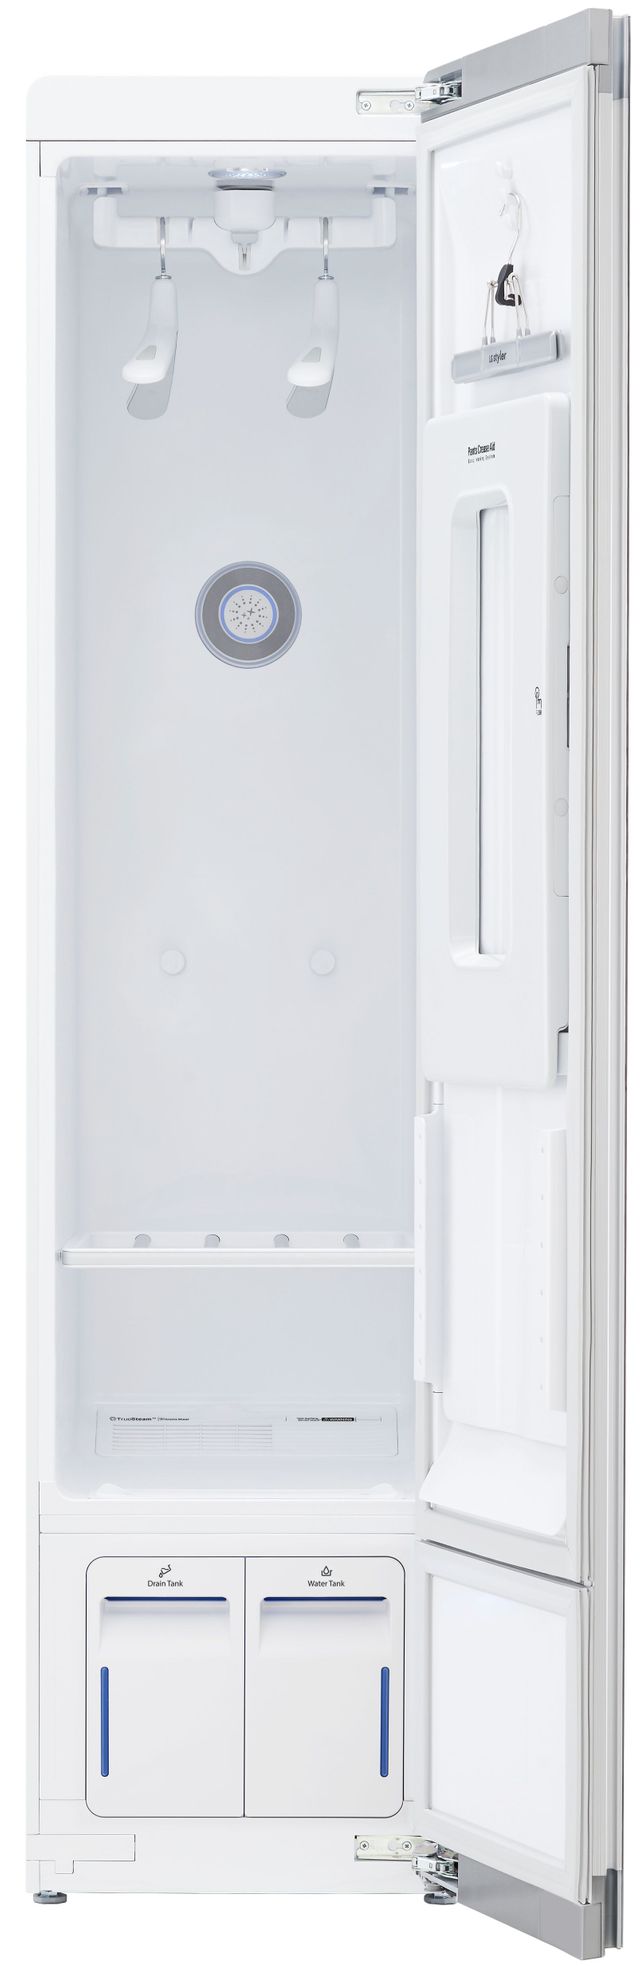 LG Styler® Espresso Smart wi-fi Enabled Steam Closet with TrueSteam® Technology and Exclusive Moving Hangers-2